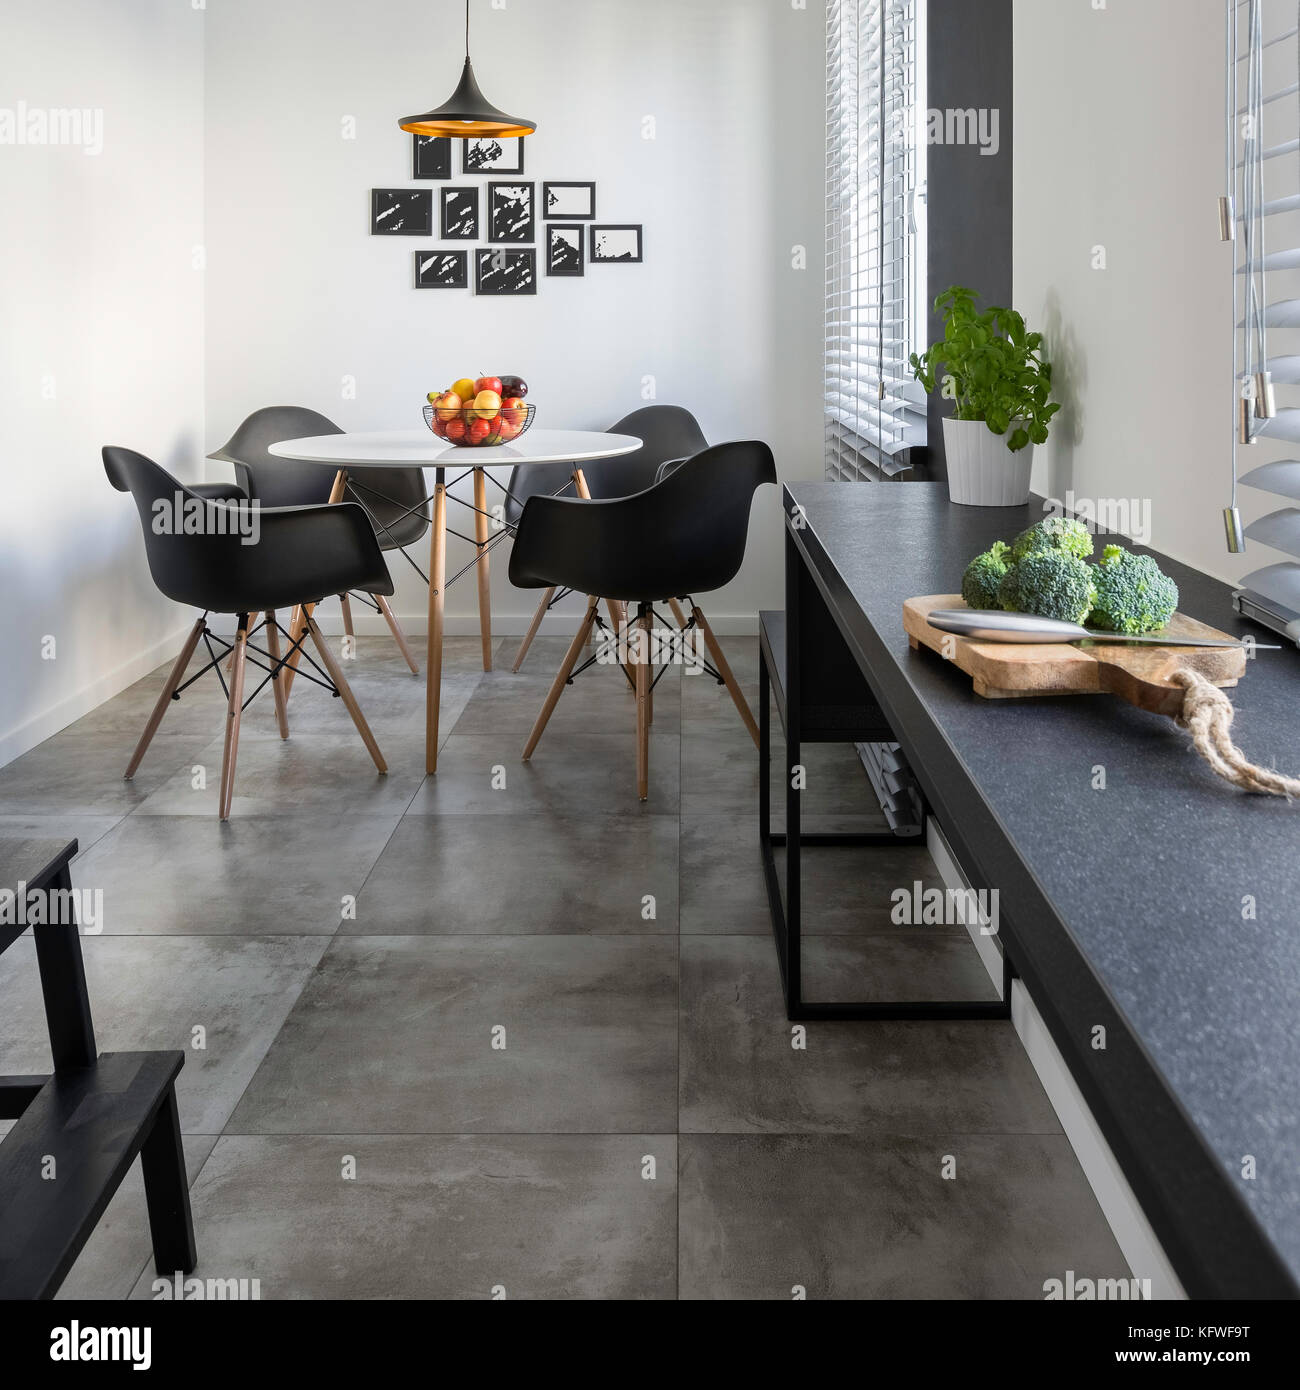 Kitchen With Long Granite Countertop Concrete Floor Tiles And